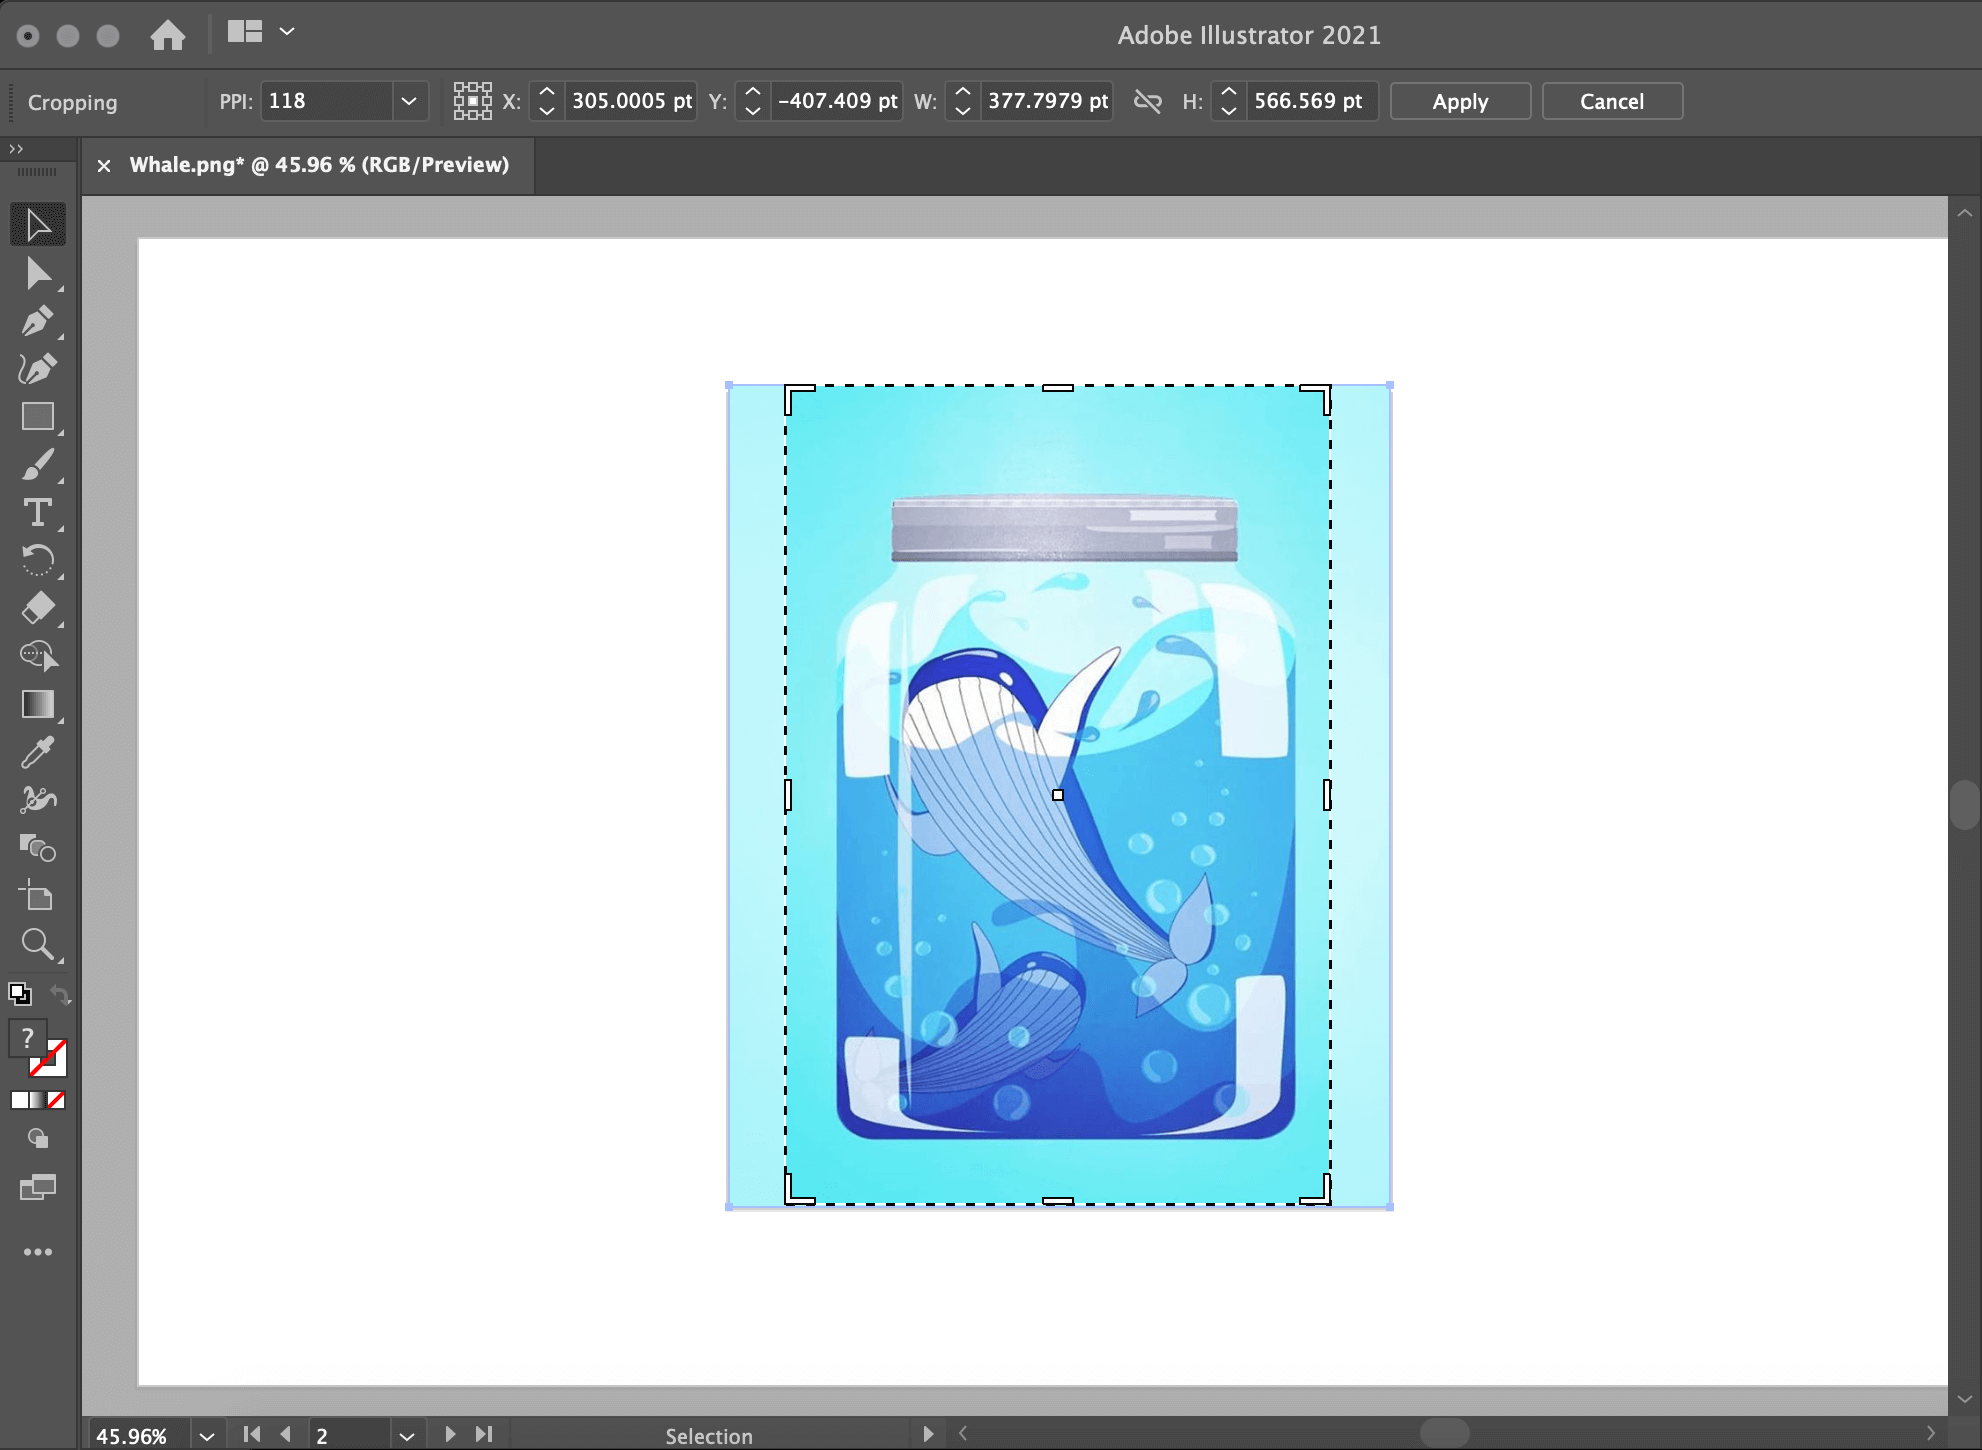 Design UI showing an artwork of a whale in a jar